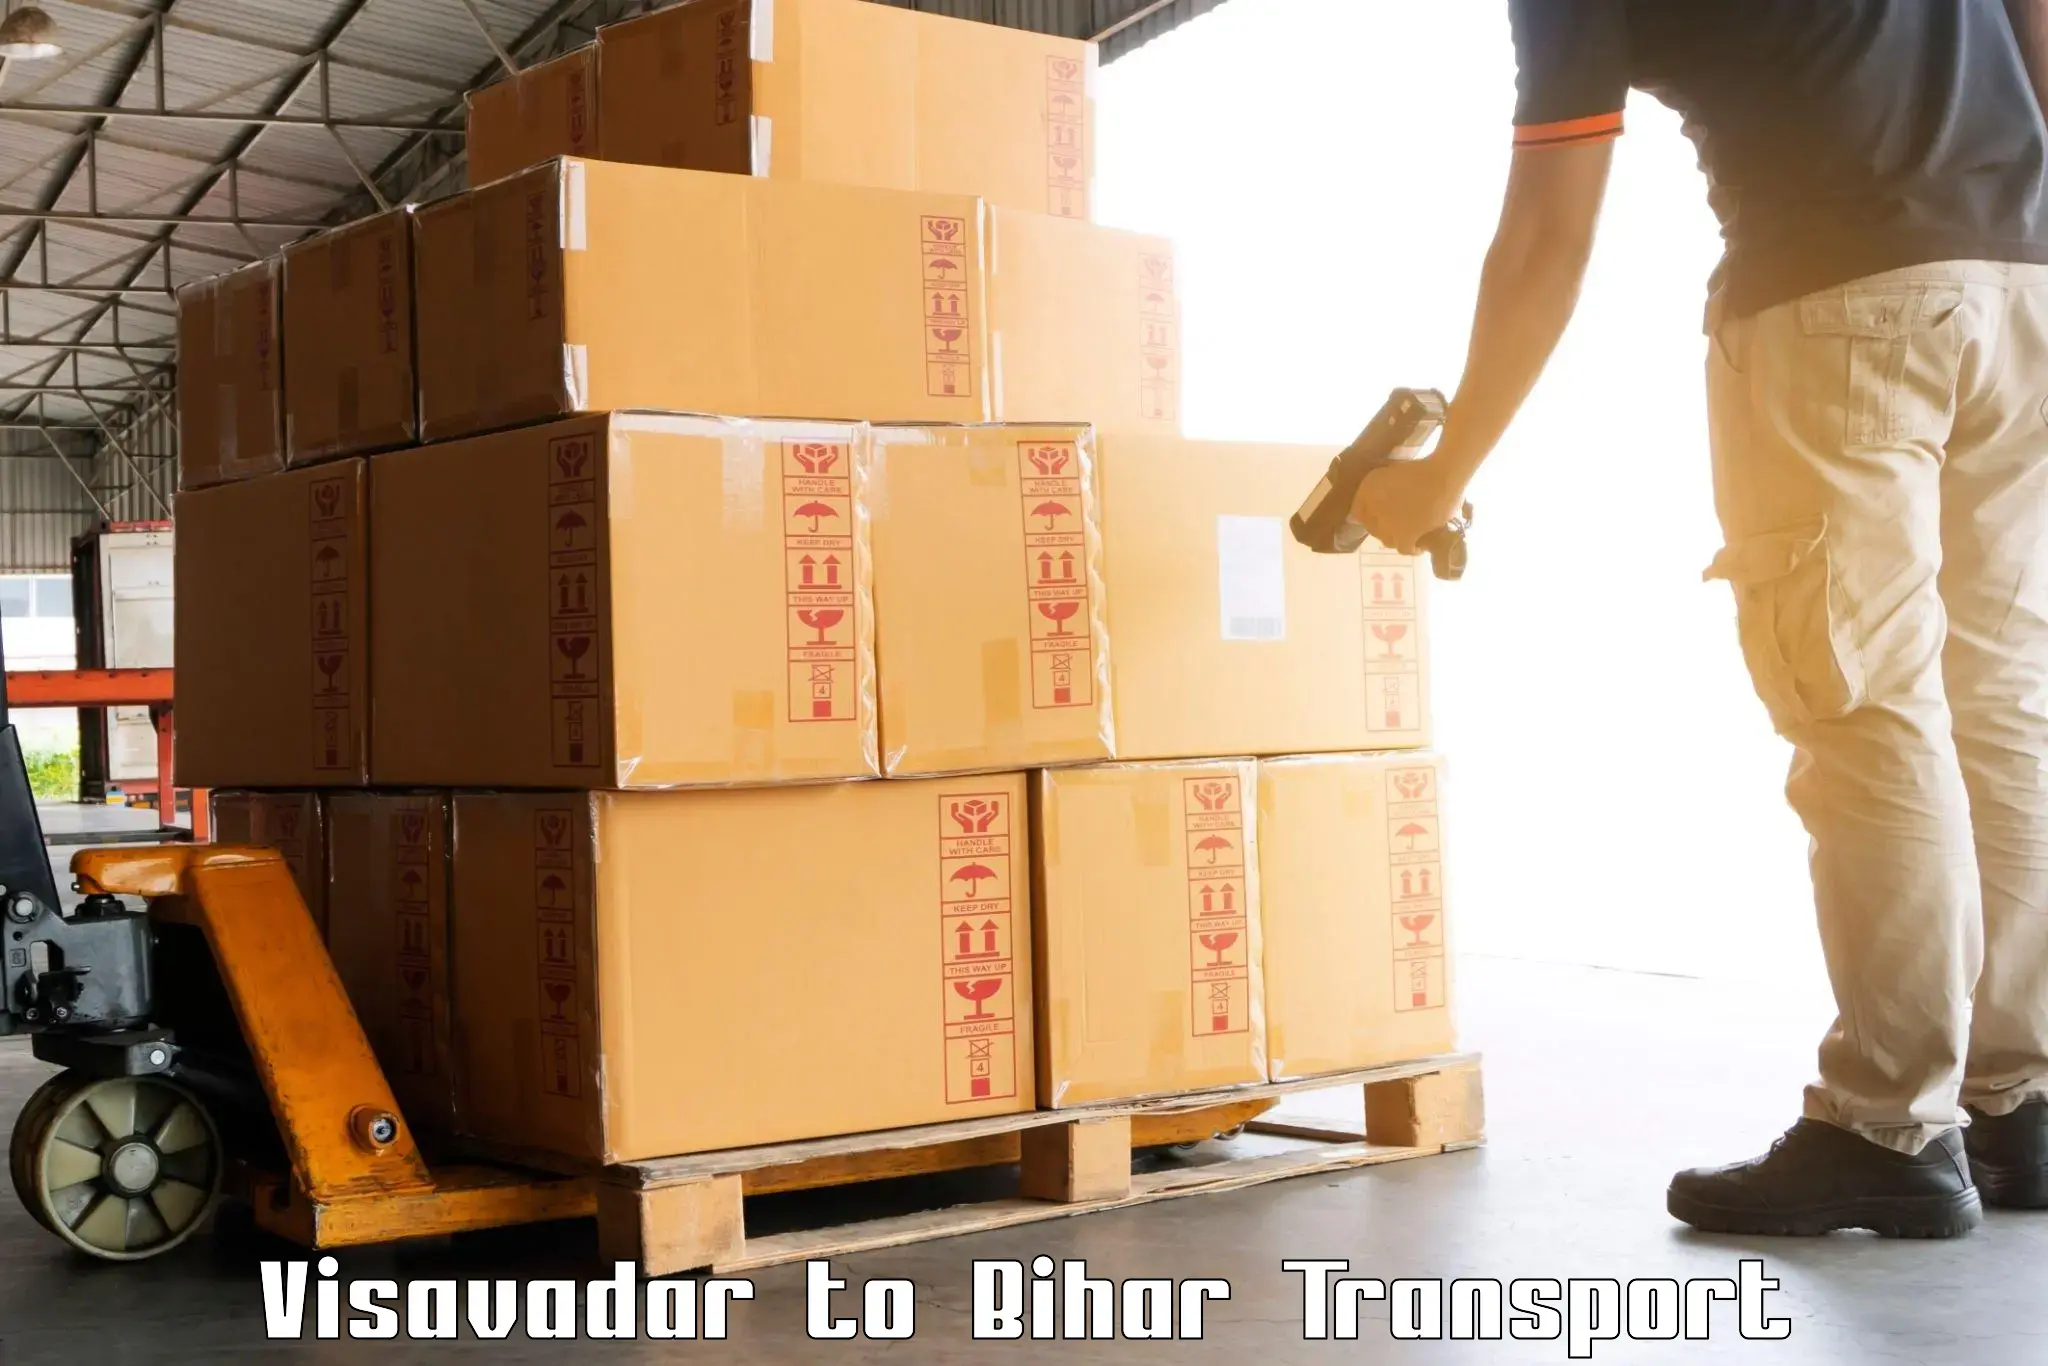 Transport bike from one state to another Visavadar to Bharwara